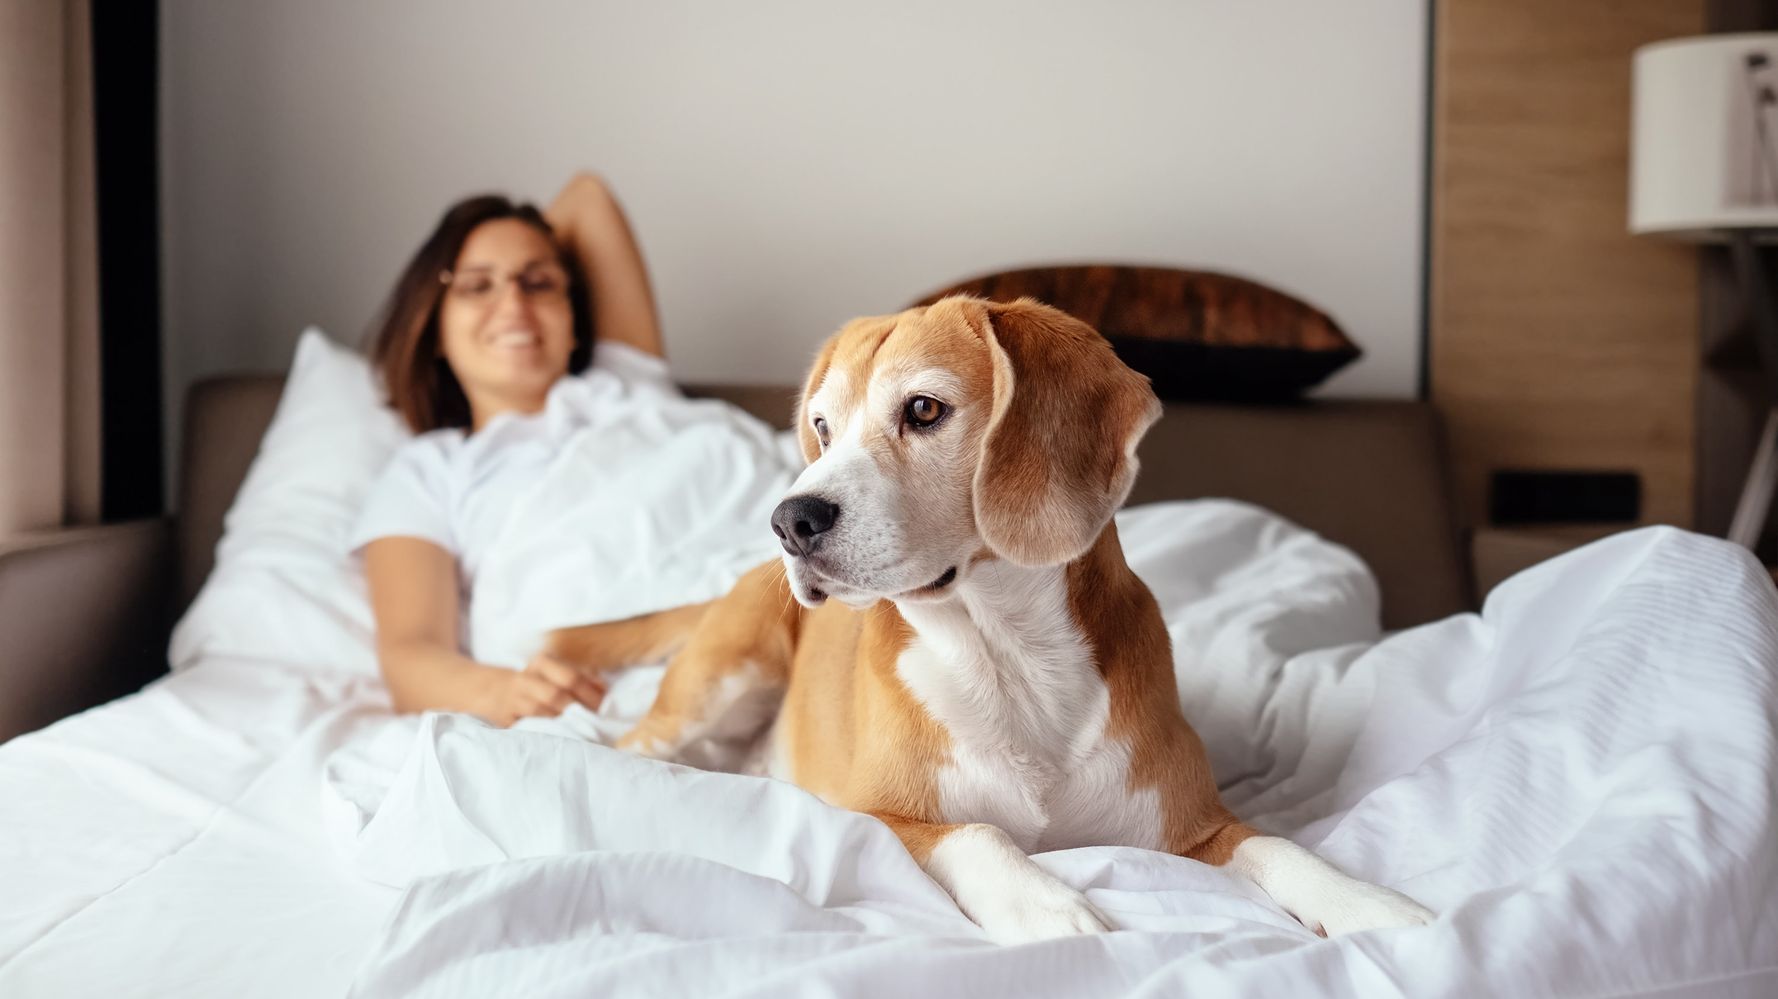 Women Sleep Better With Dogs Than With Human Partners, Study Says |  HuffPost Life